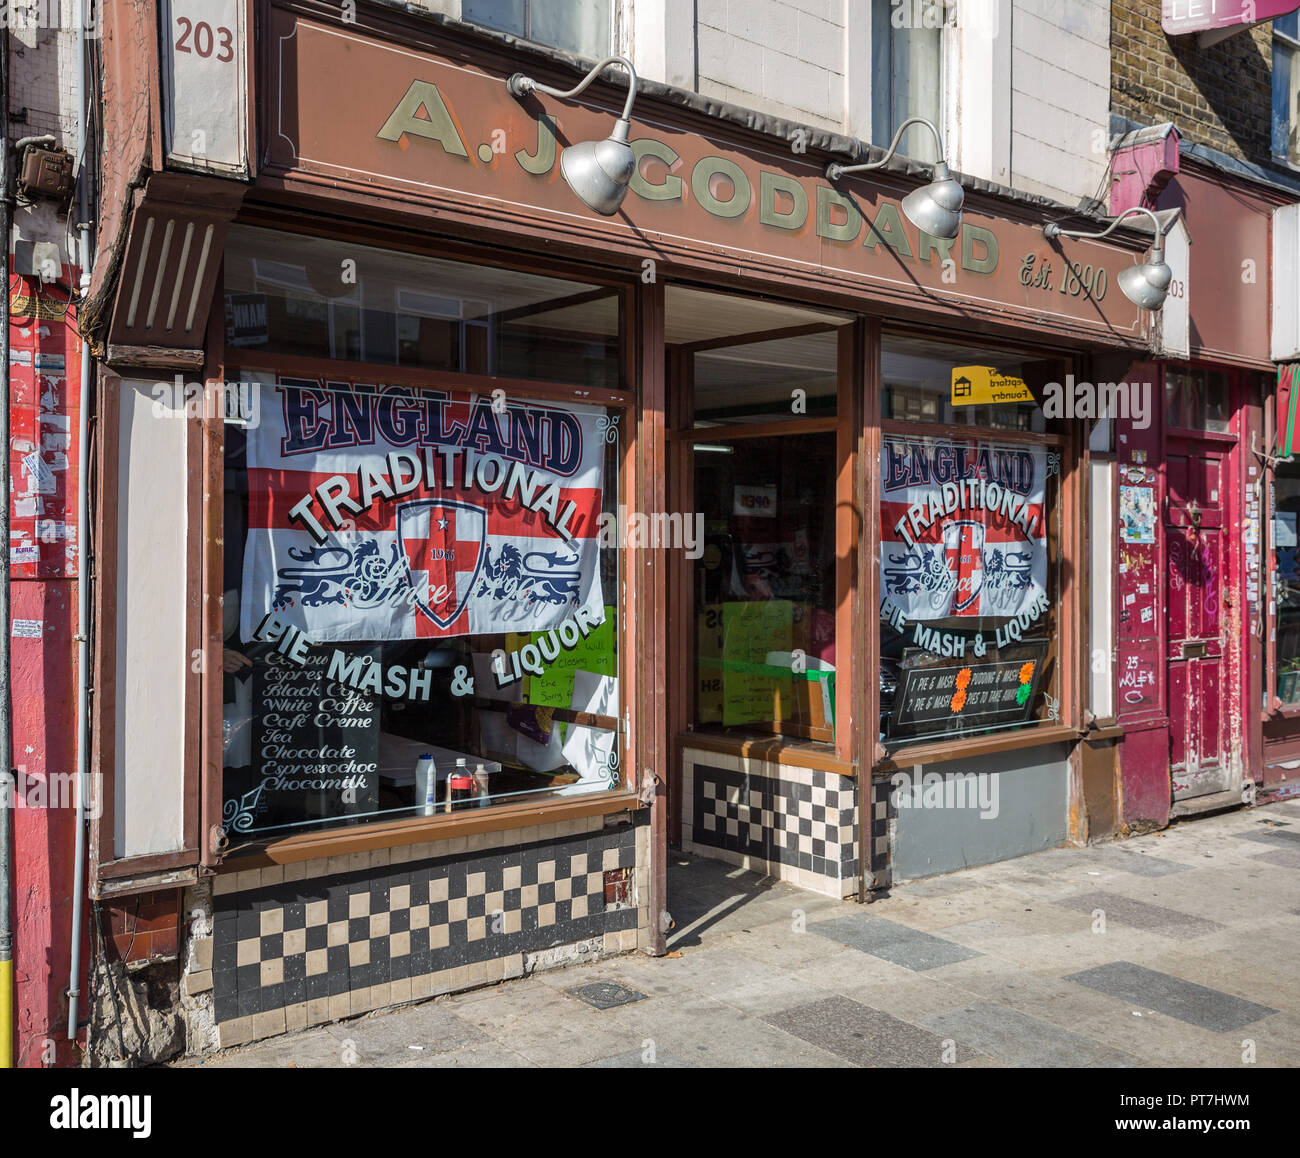 London, UK. 7th October 2018. Final trading day of A.J. Goddard traditional Pie & Mash café in Deptford. Credit: Guy Corbishley/Alamy Live News Stock Photo